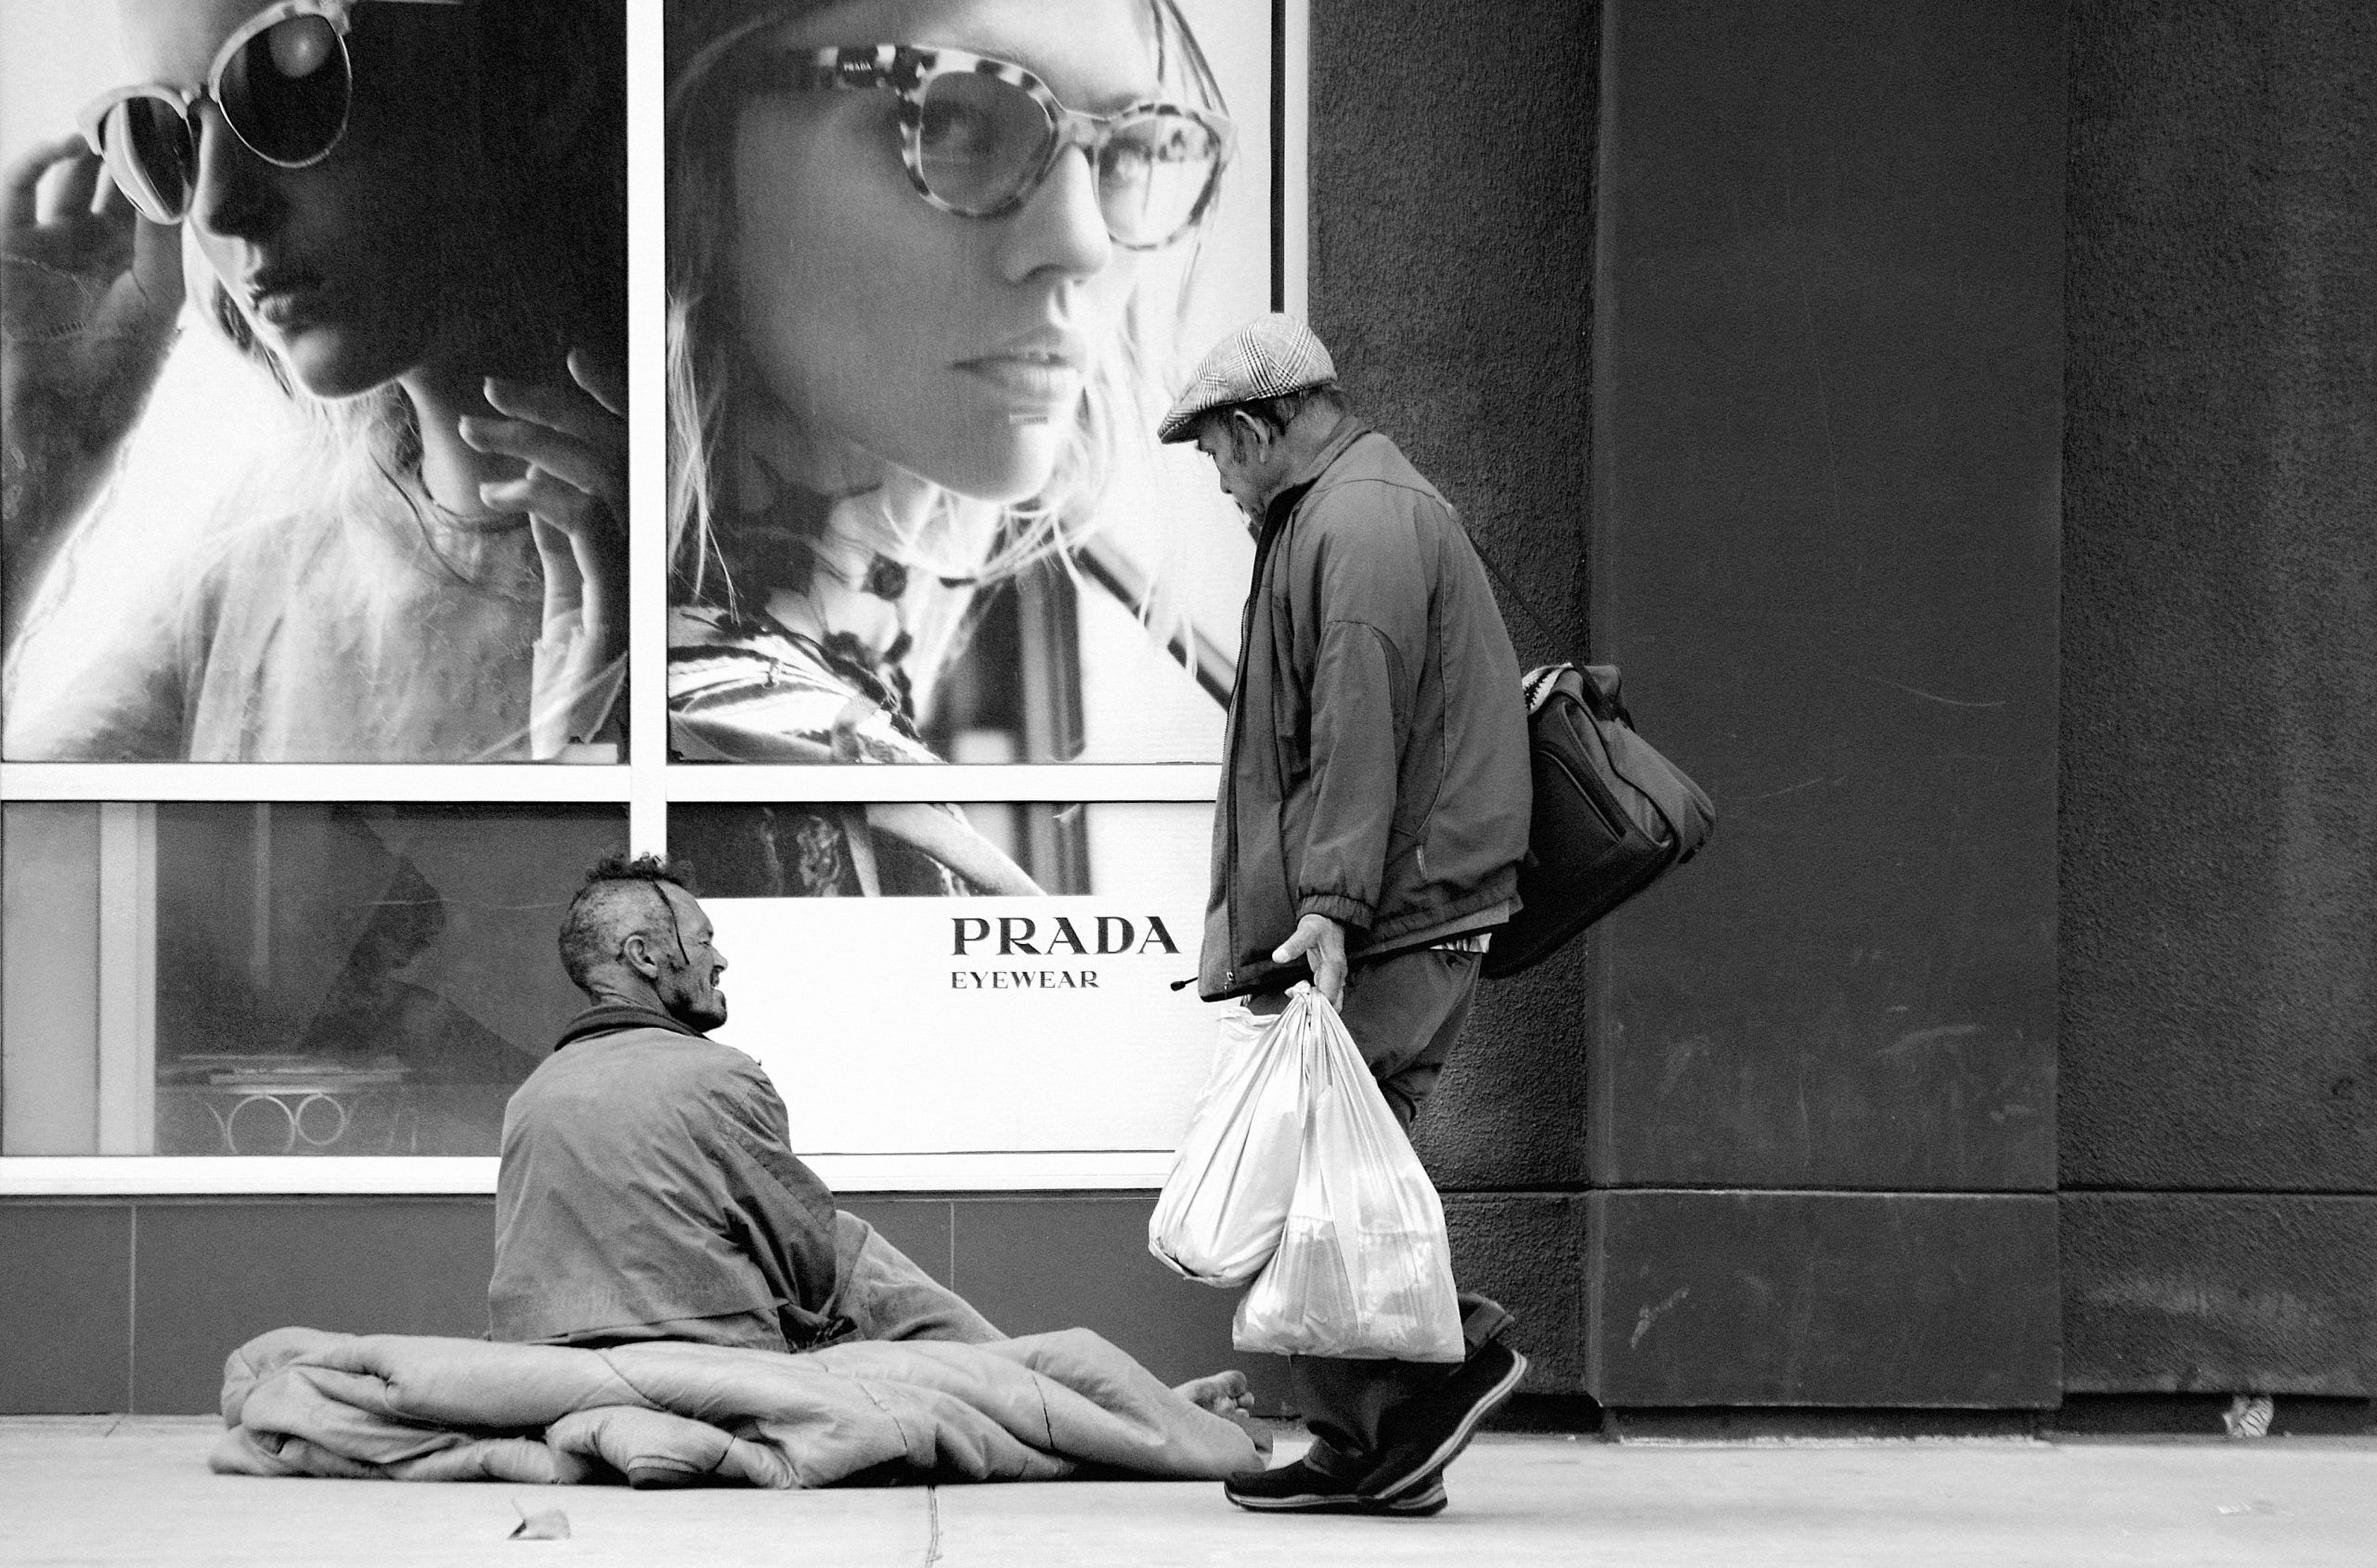 Homeless Person and Pedestrian in front of fancy Prada store front.